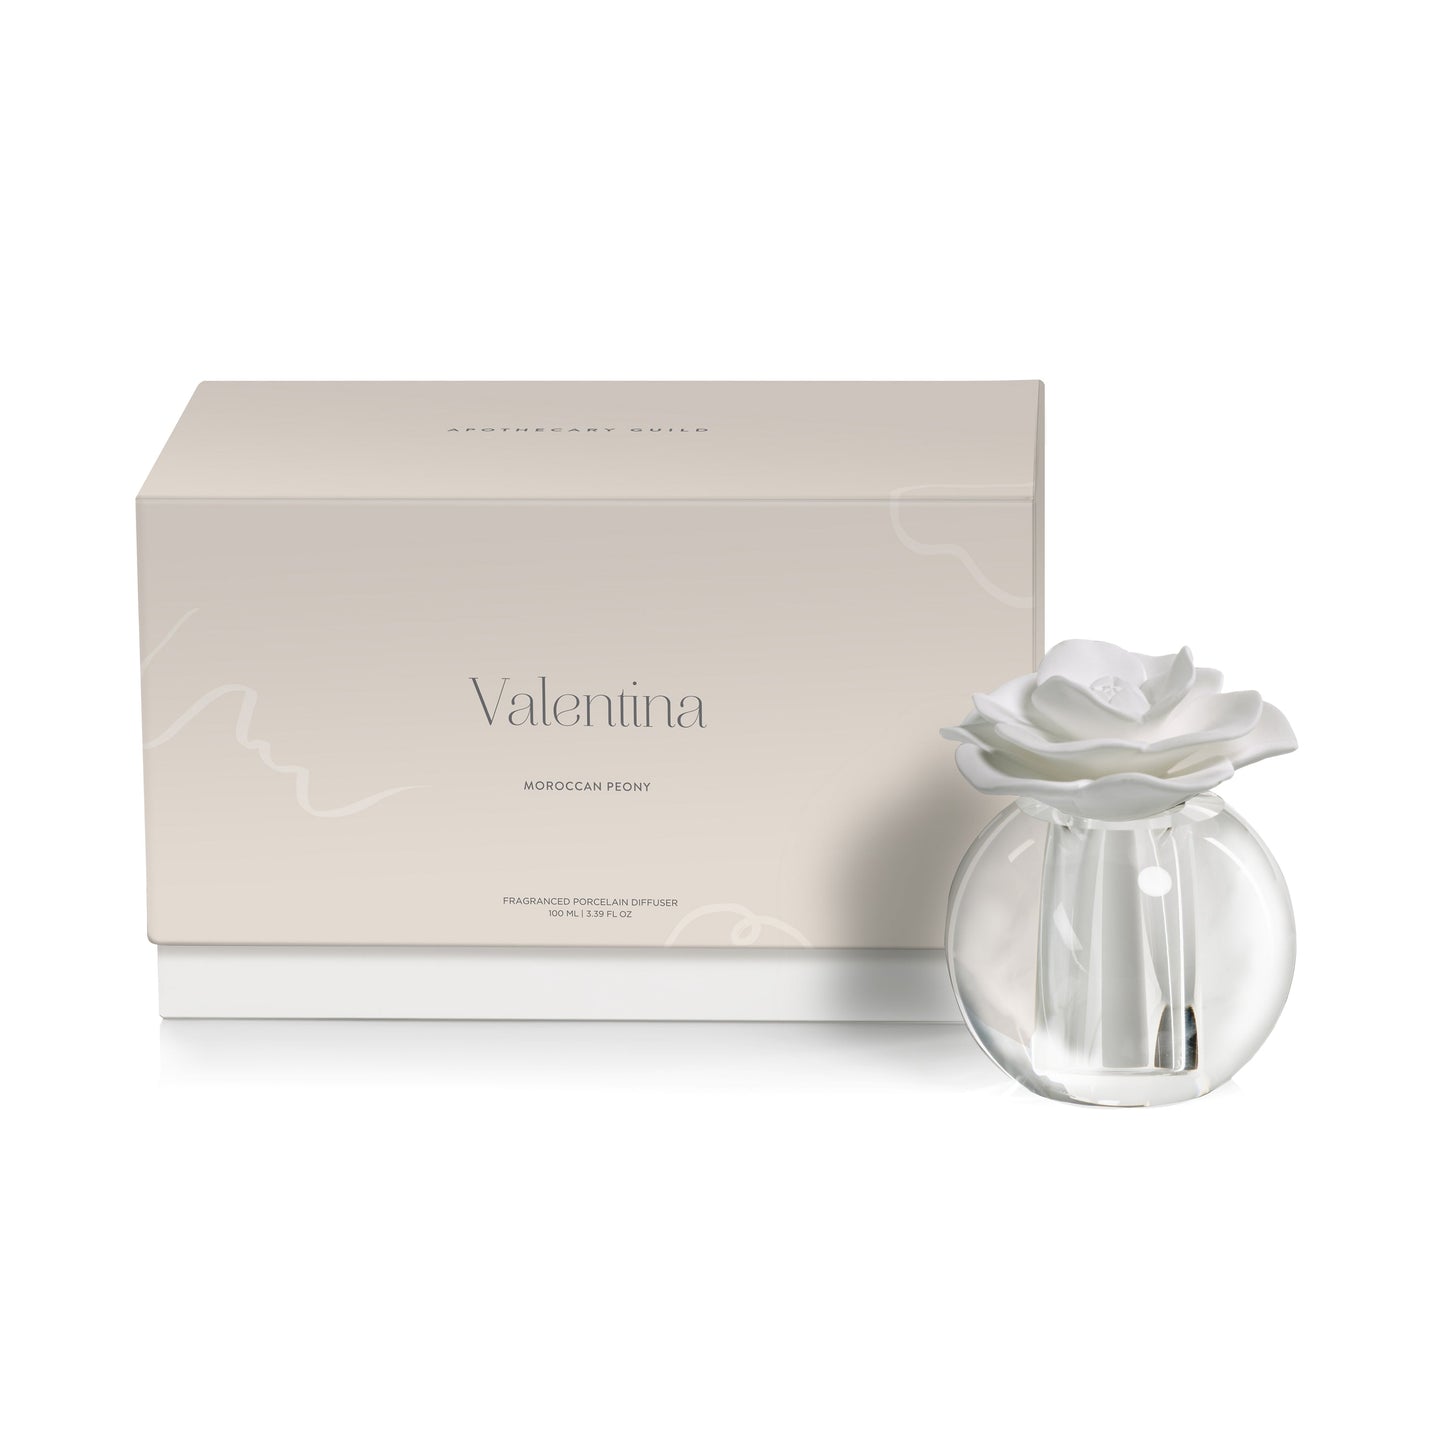 MOROCCAN PEONY - VALENTINA Crystal Ball Zodax Porcelain Diffuser